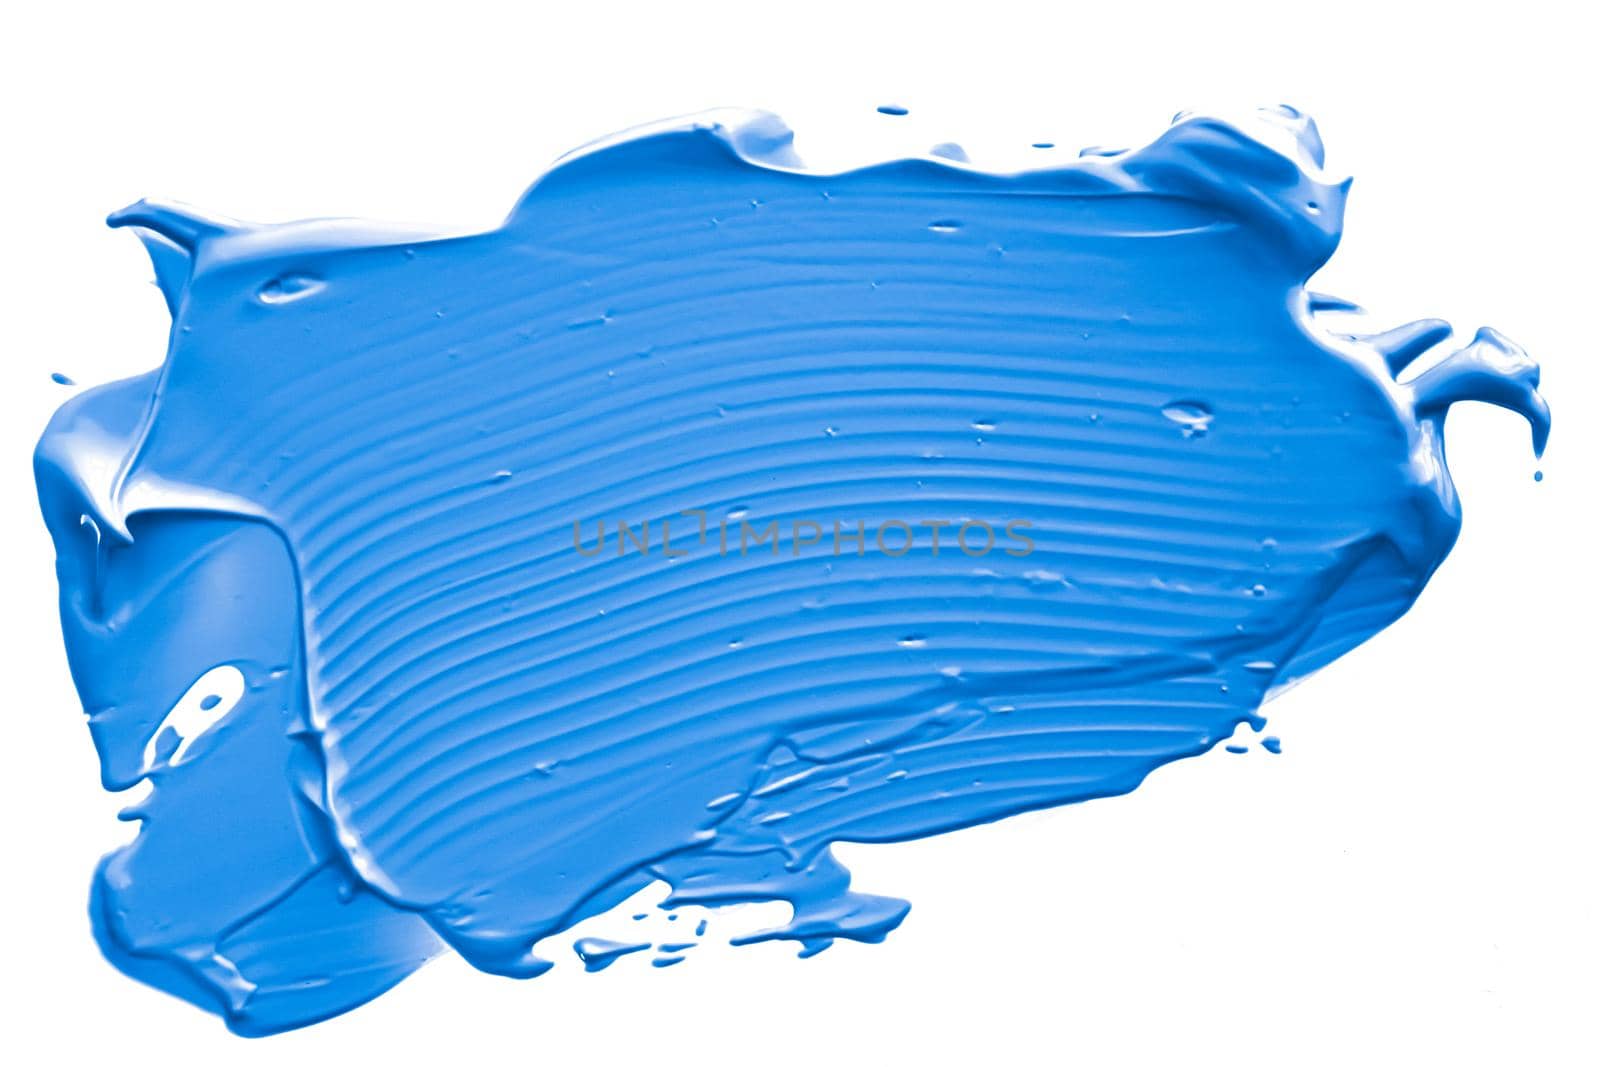 Blue beauty swatch, skincare and makeup cosmetic product sample texture isolated on white background, make-up smudge, cream cosmetics smear or paint brush stroke closeup